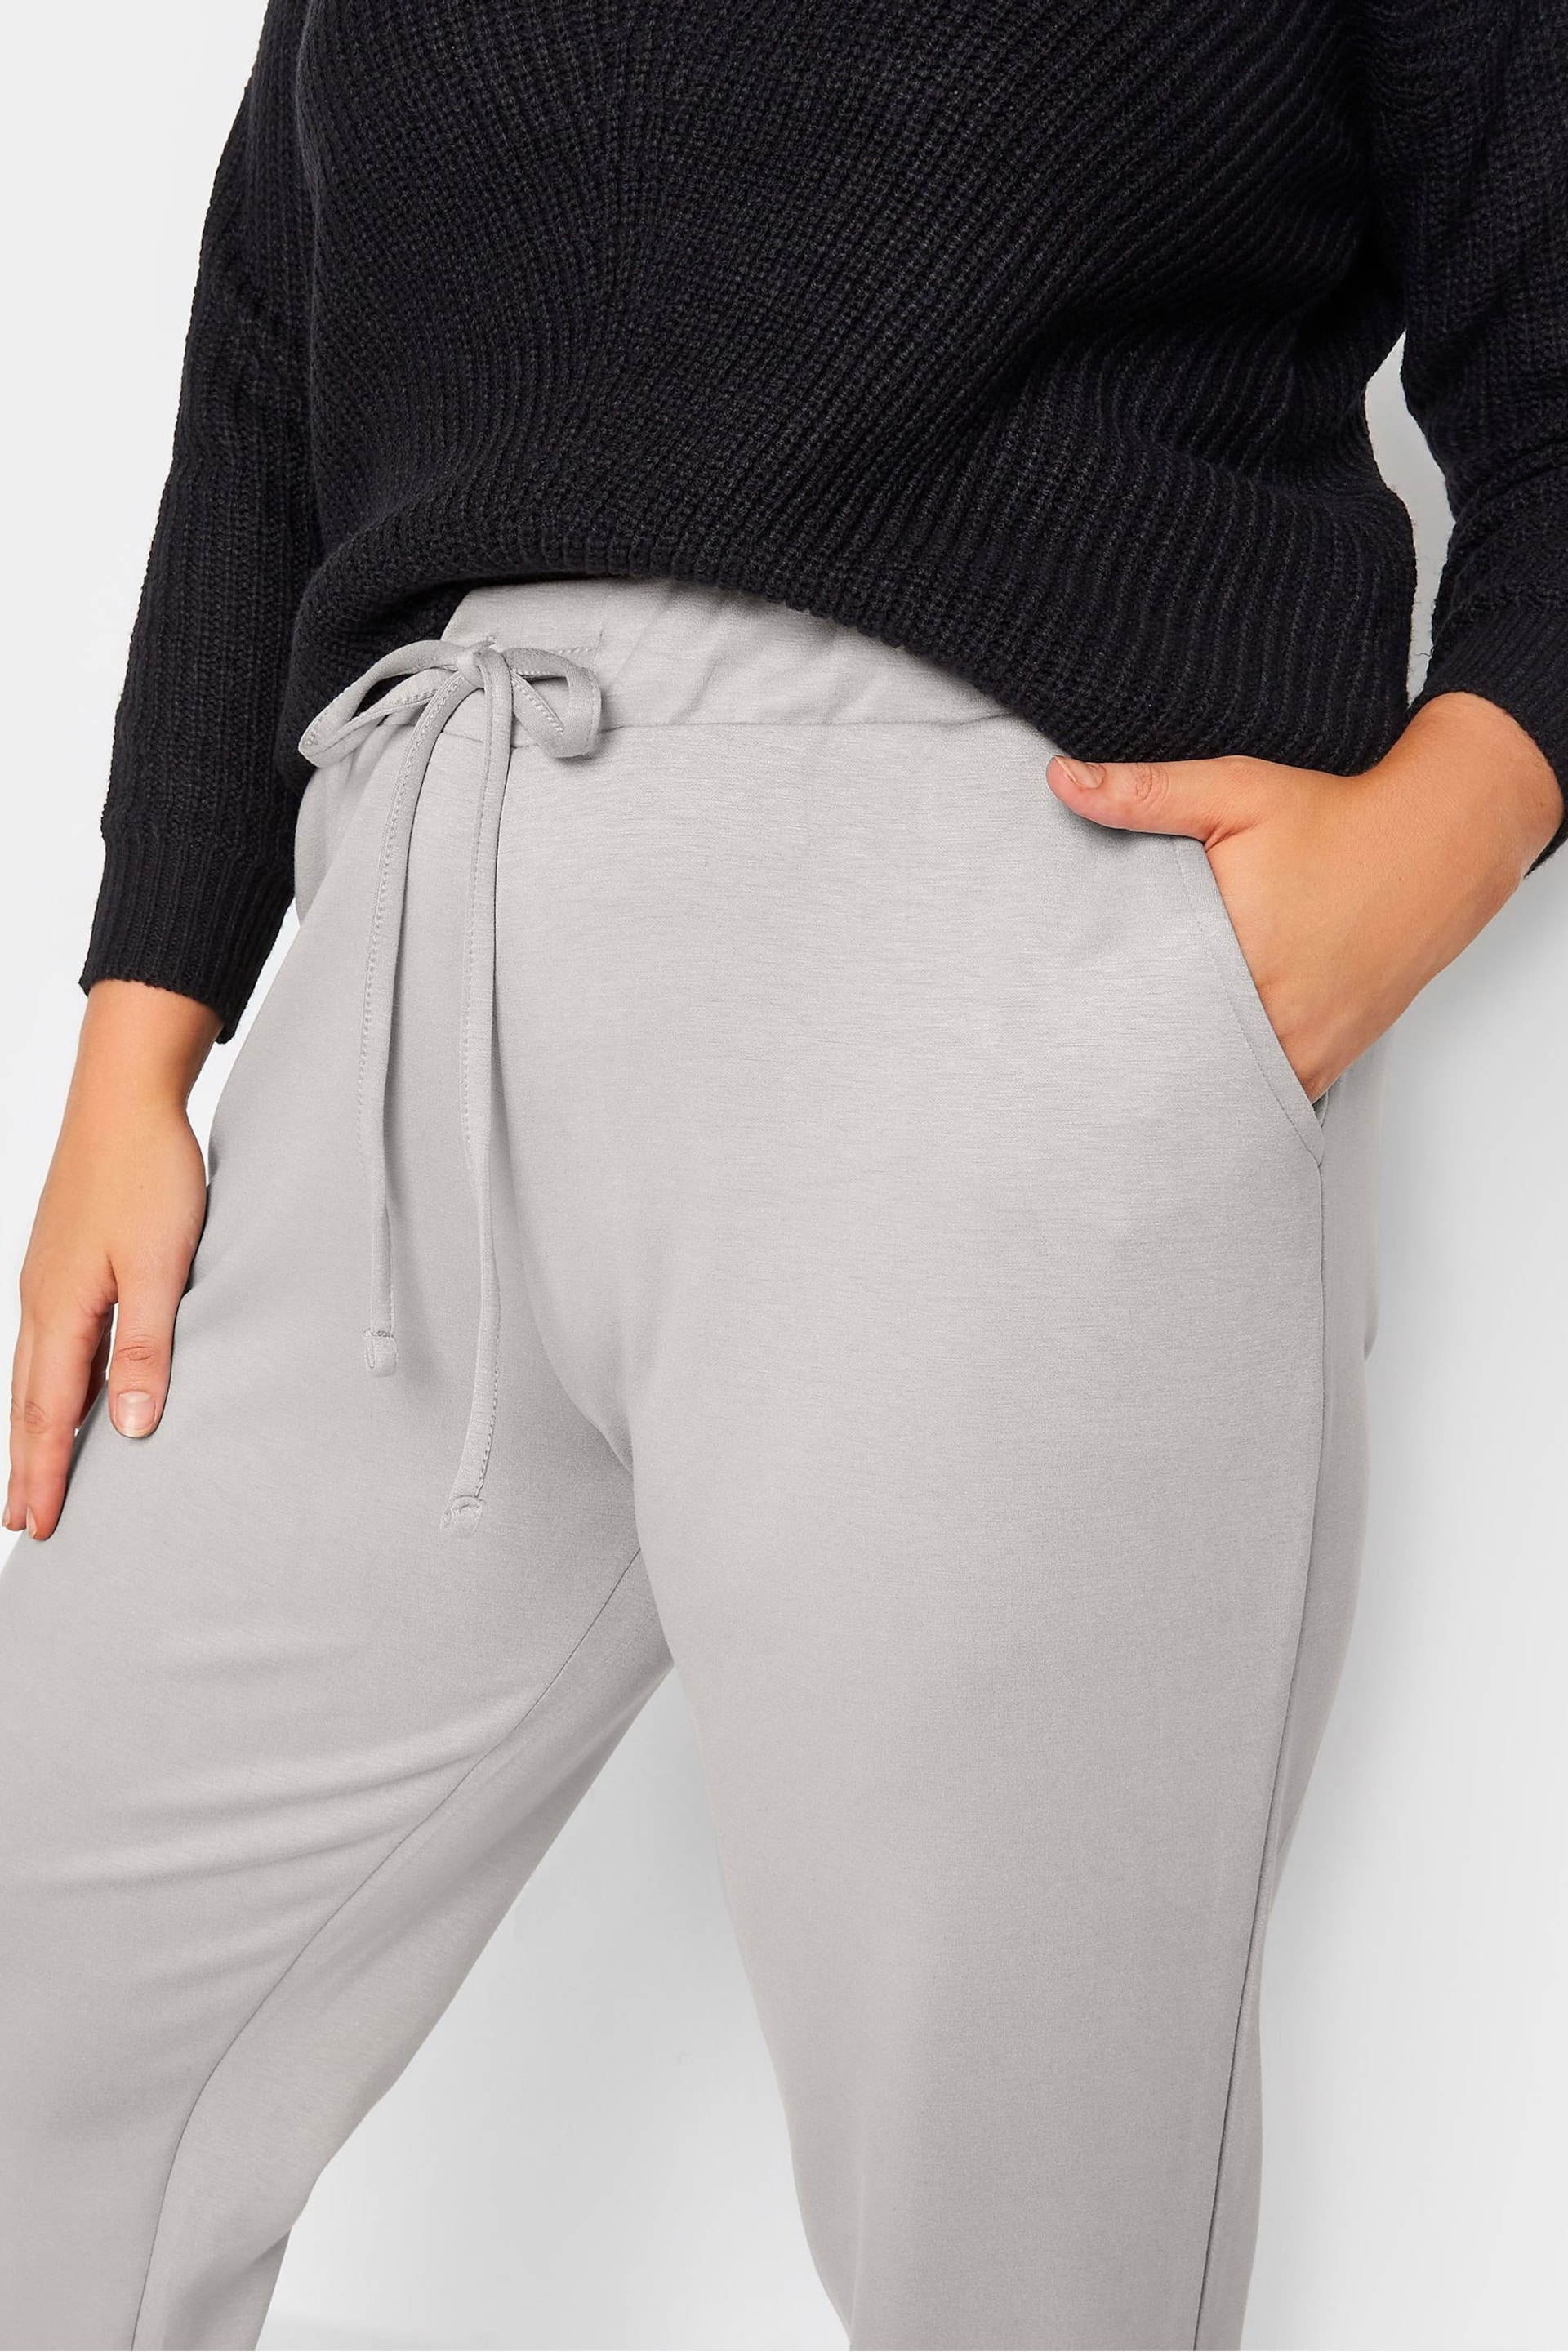 Yours Curve Grey Elasticated Cuff Side Pocket Trousers - Image 3 of 3